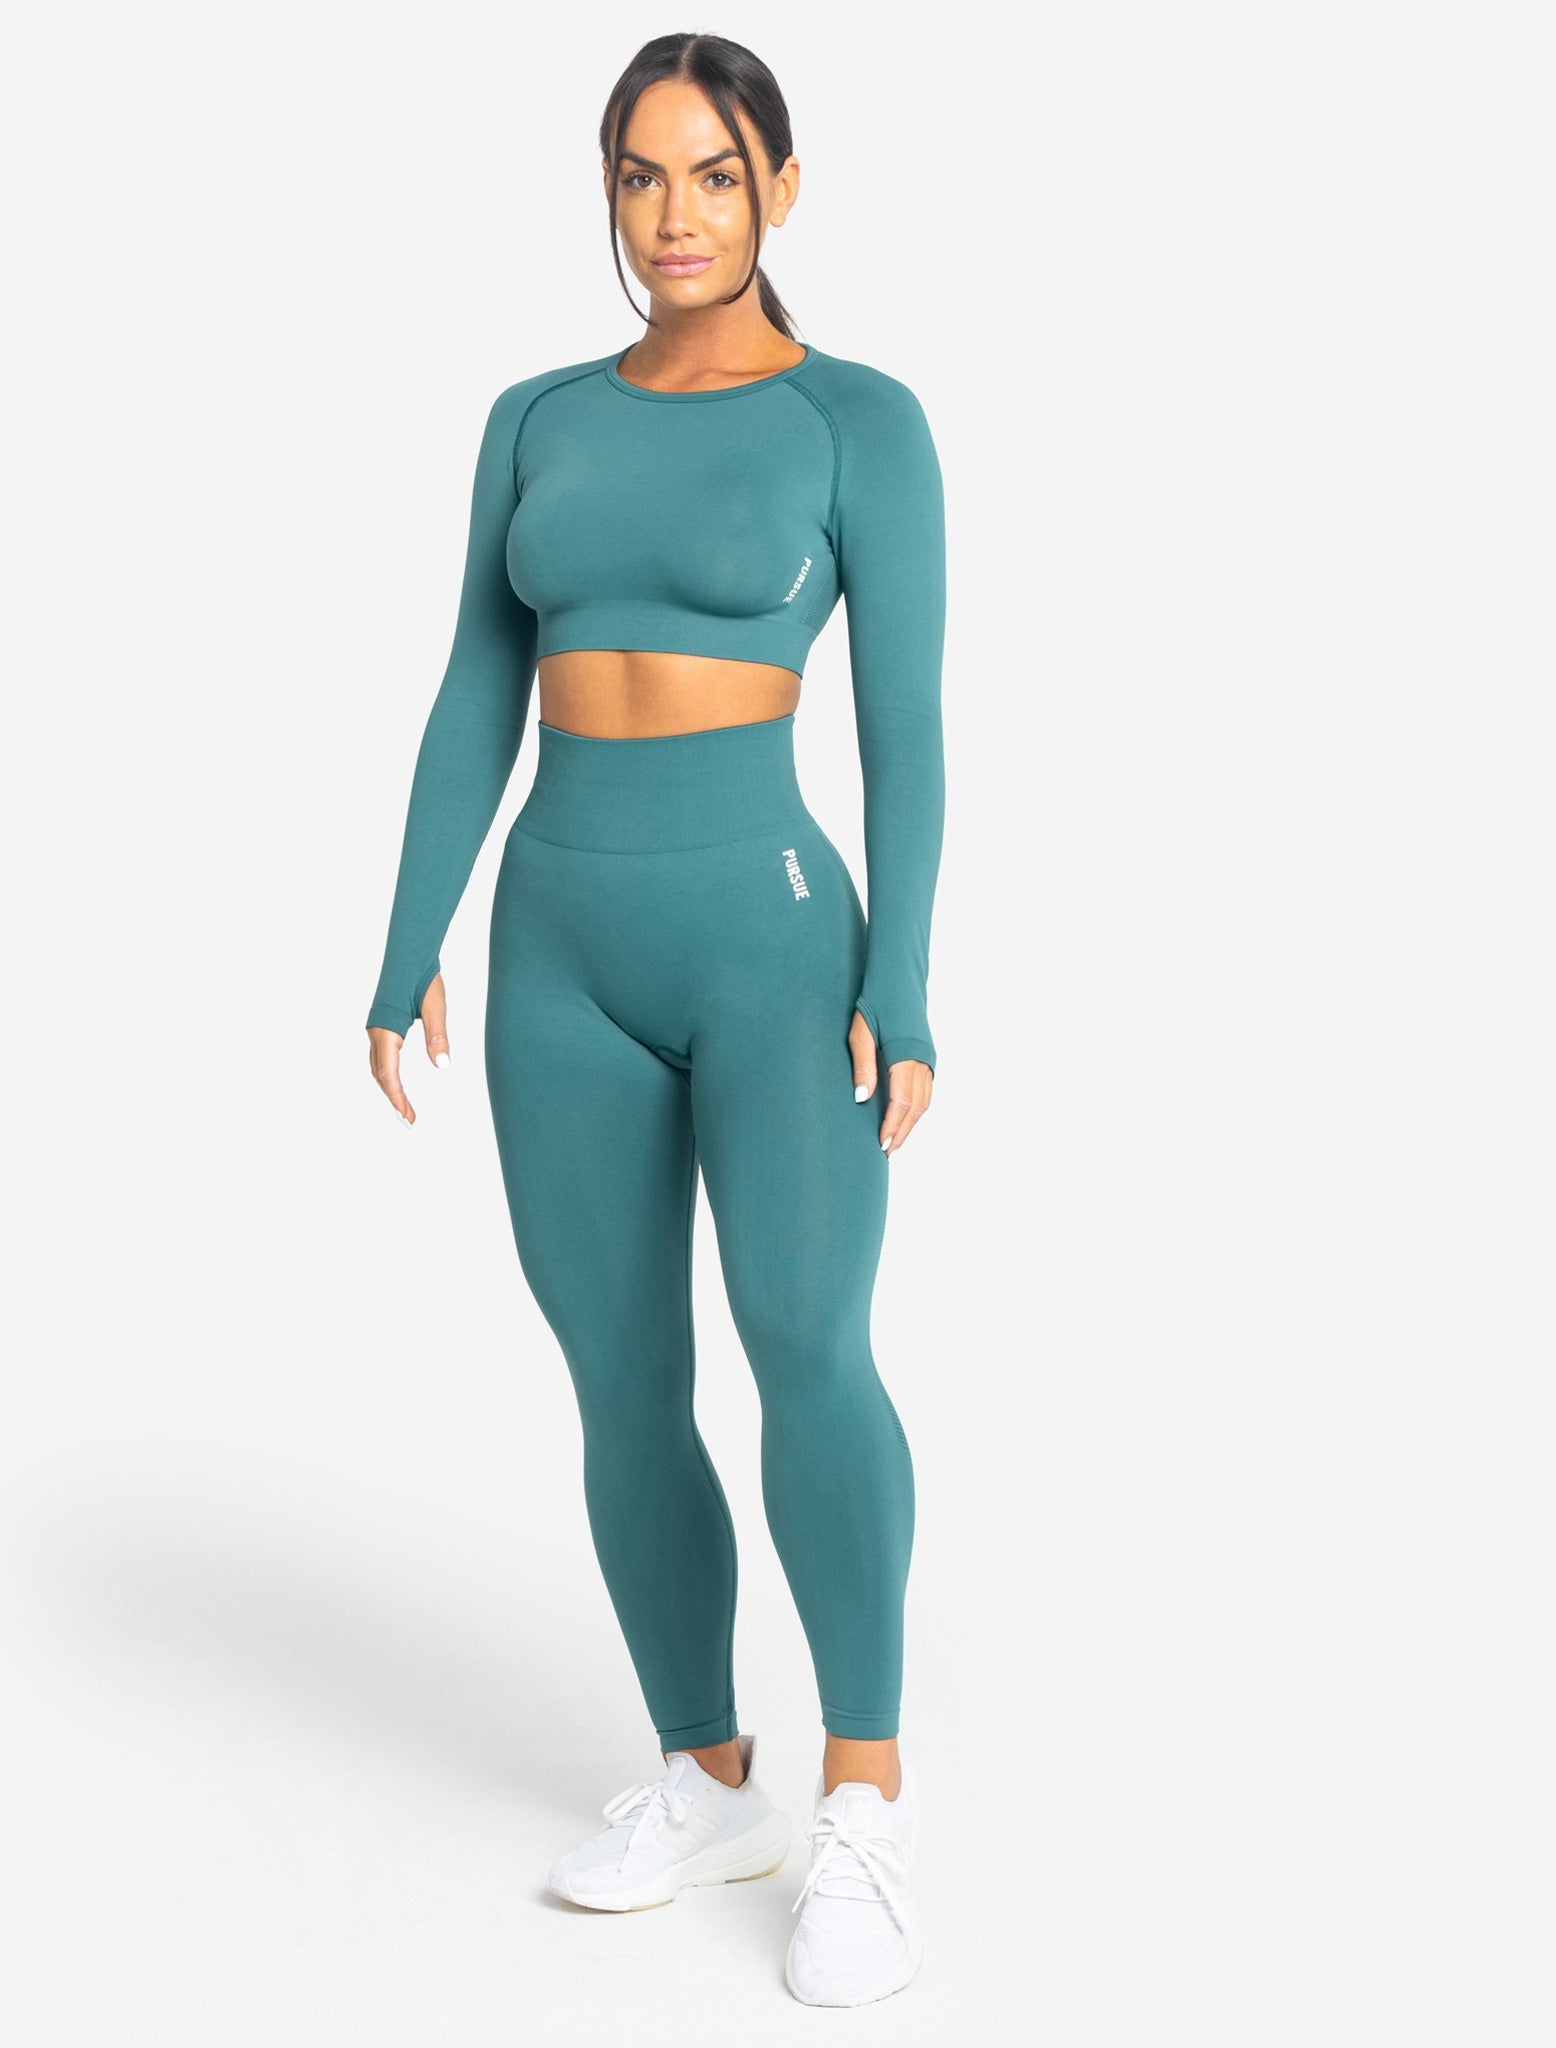 Seamless Clothing, Gym Activewear & Apparel